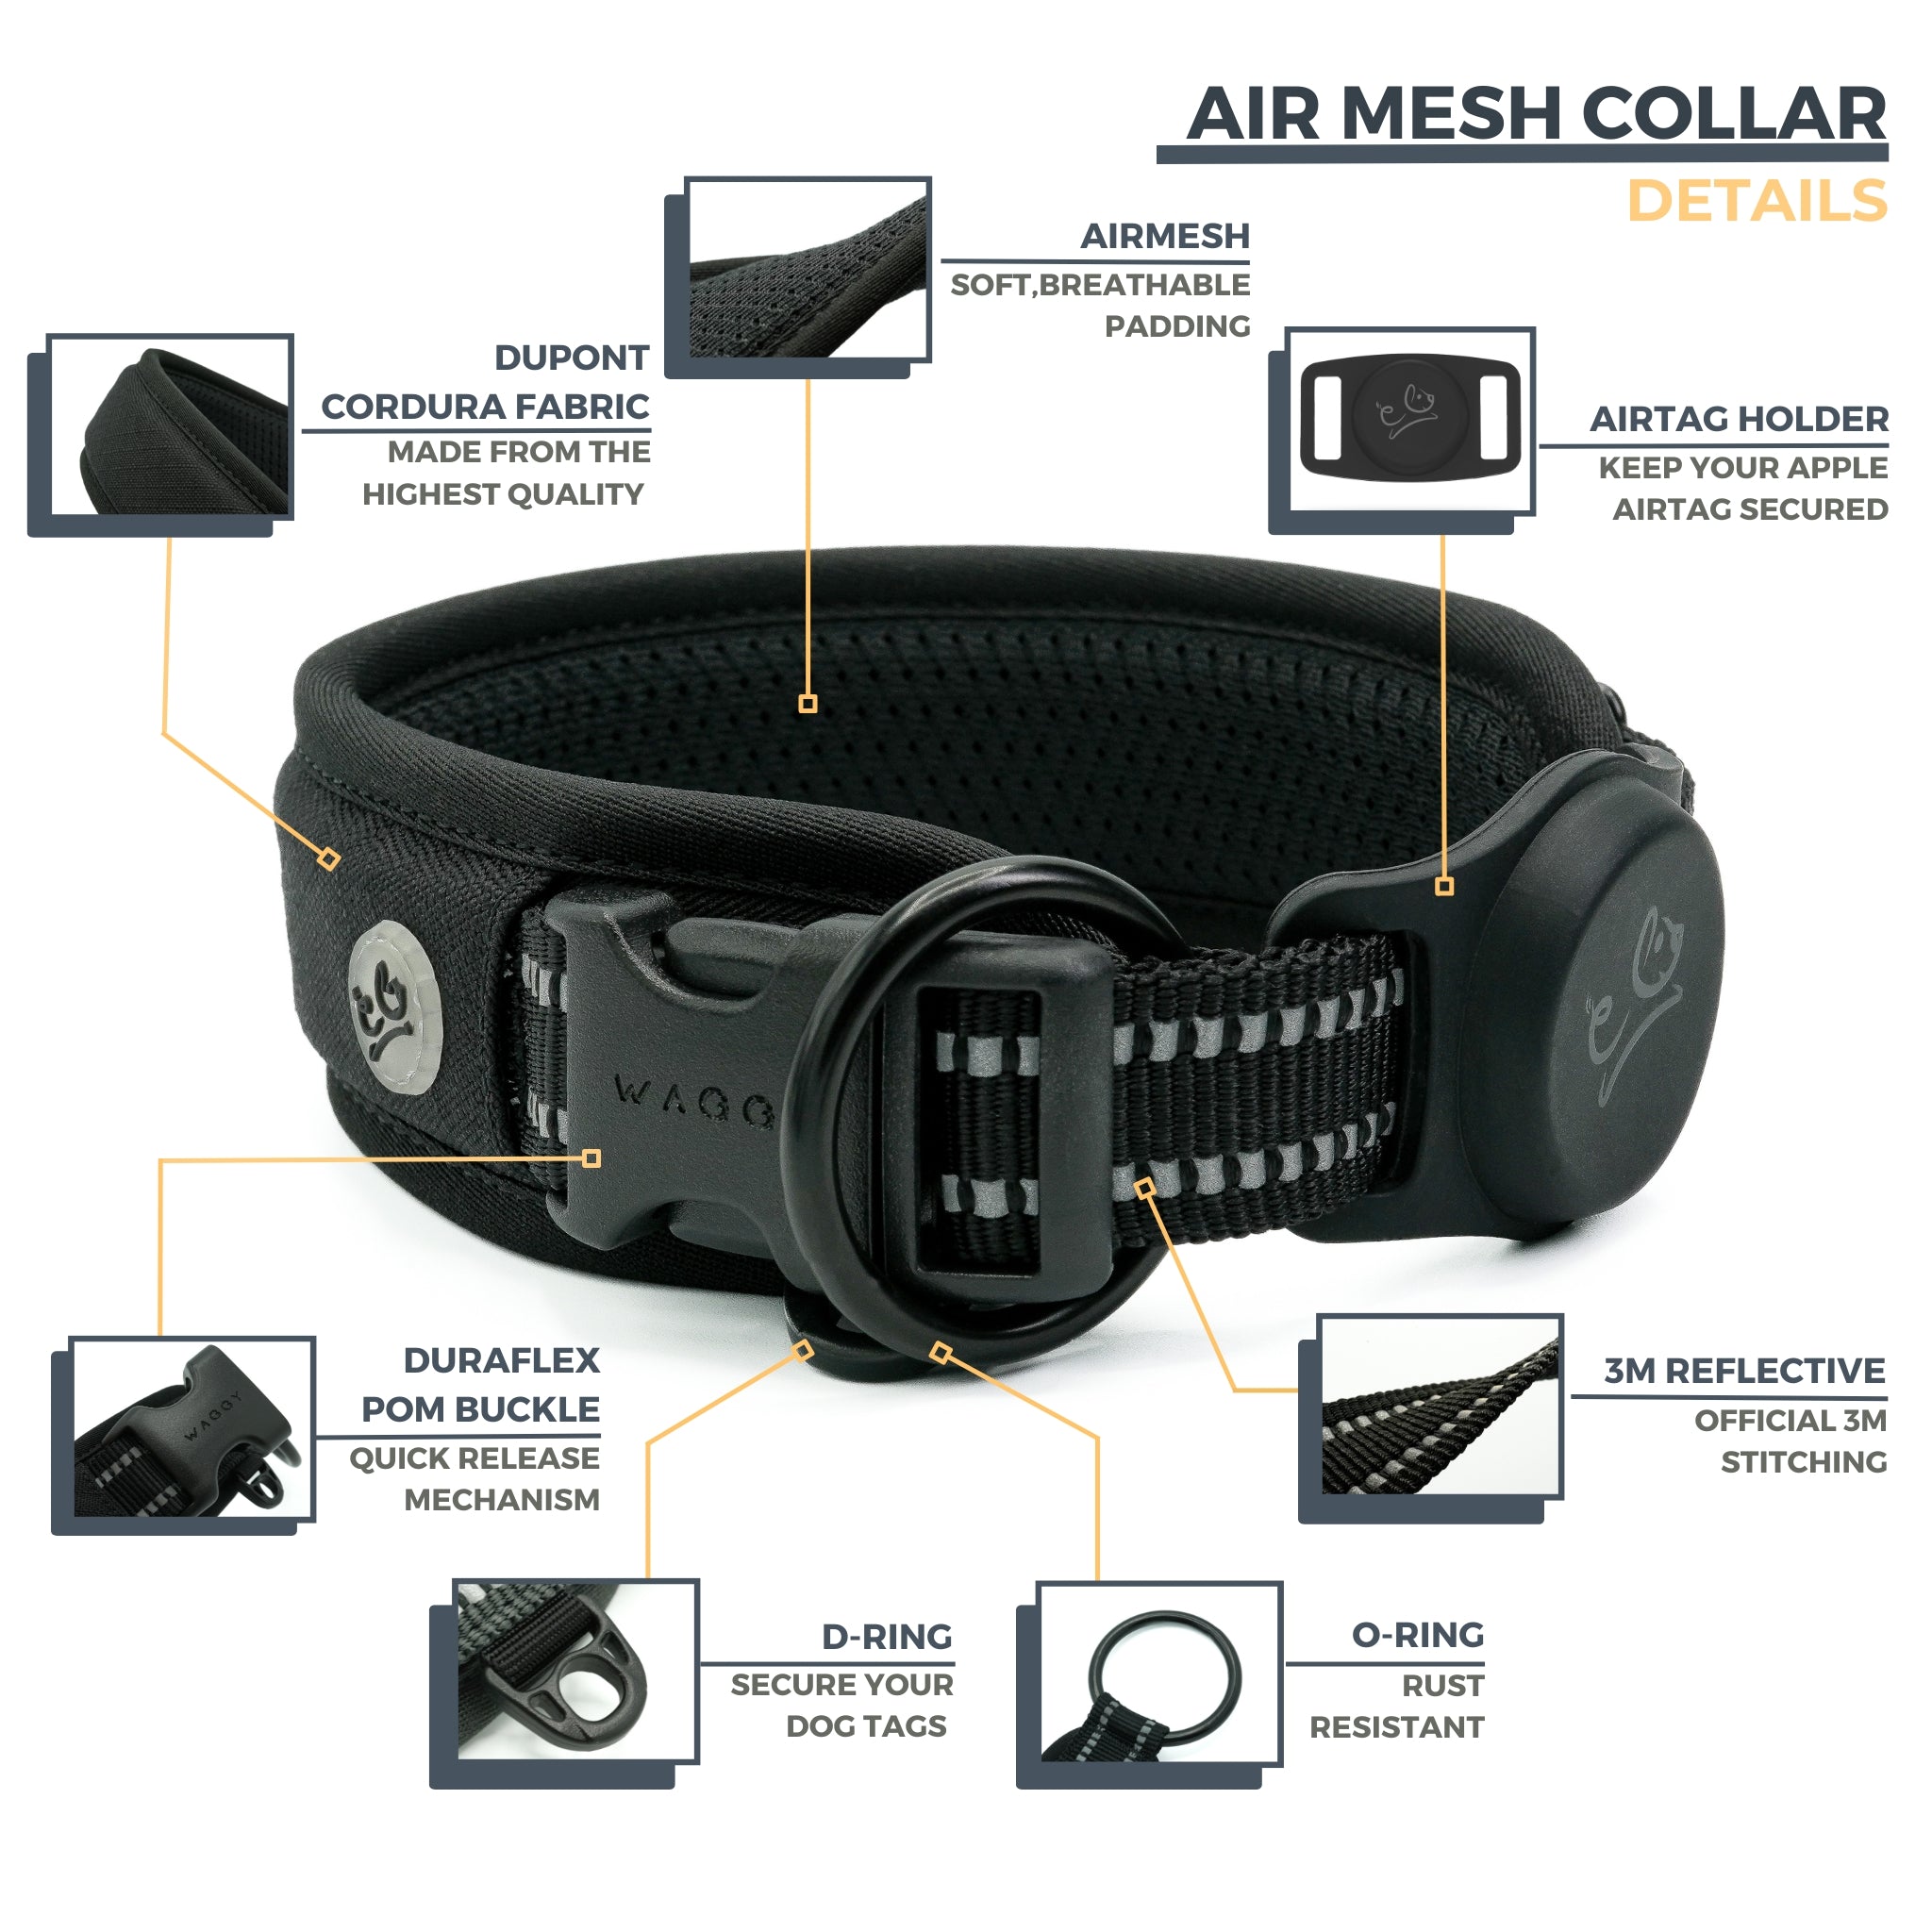 7 features &amp; details regarding Black Air Mesh dog collar.  Dupont Cordura Fabric; Air Mesh padding; Airtag Holder; Duraflex buckle; D-ring; O-ring; 3M Reflective stitching with short description and close up images.